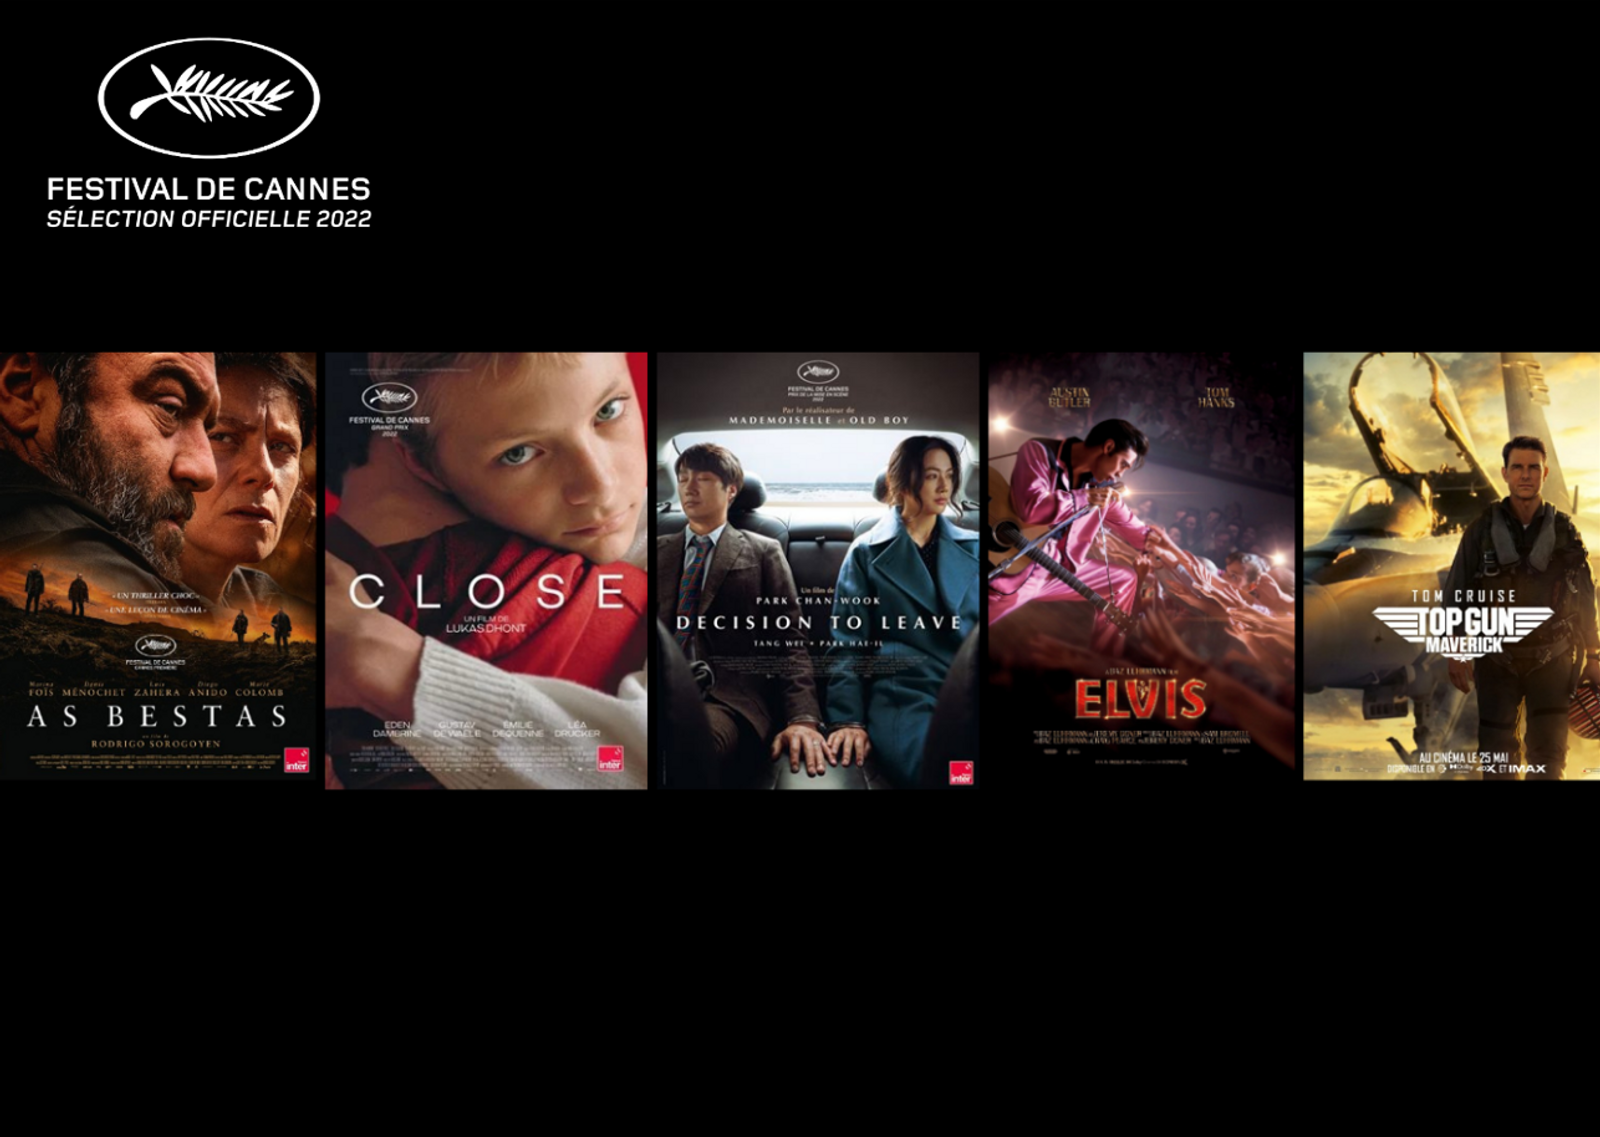 The 2022 Selection around the world Festival de Cannes